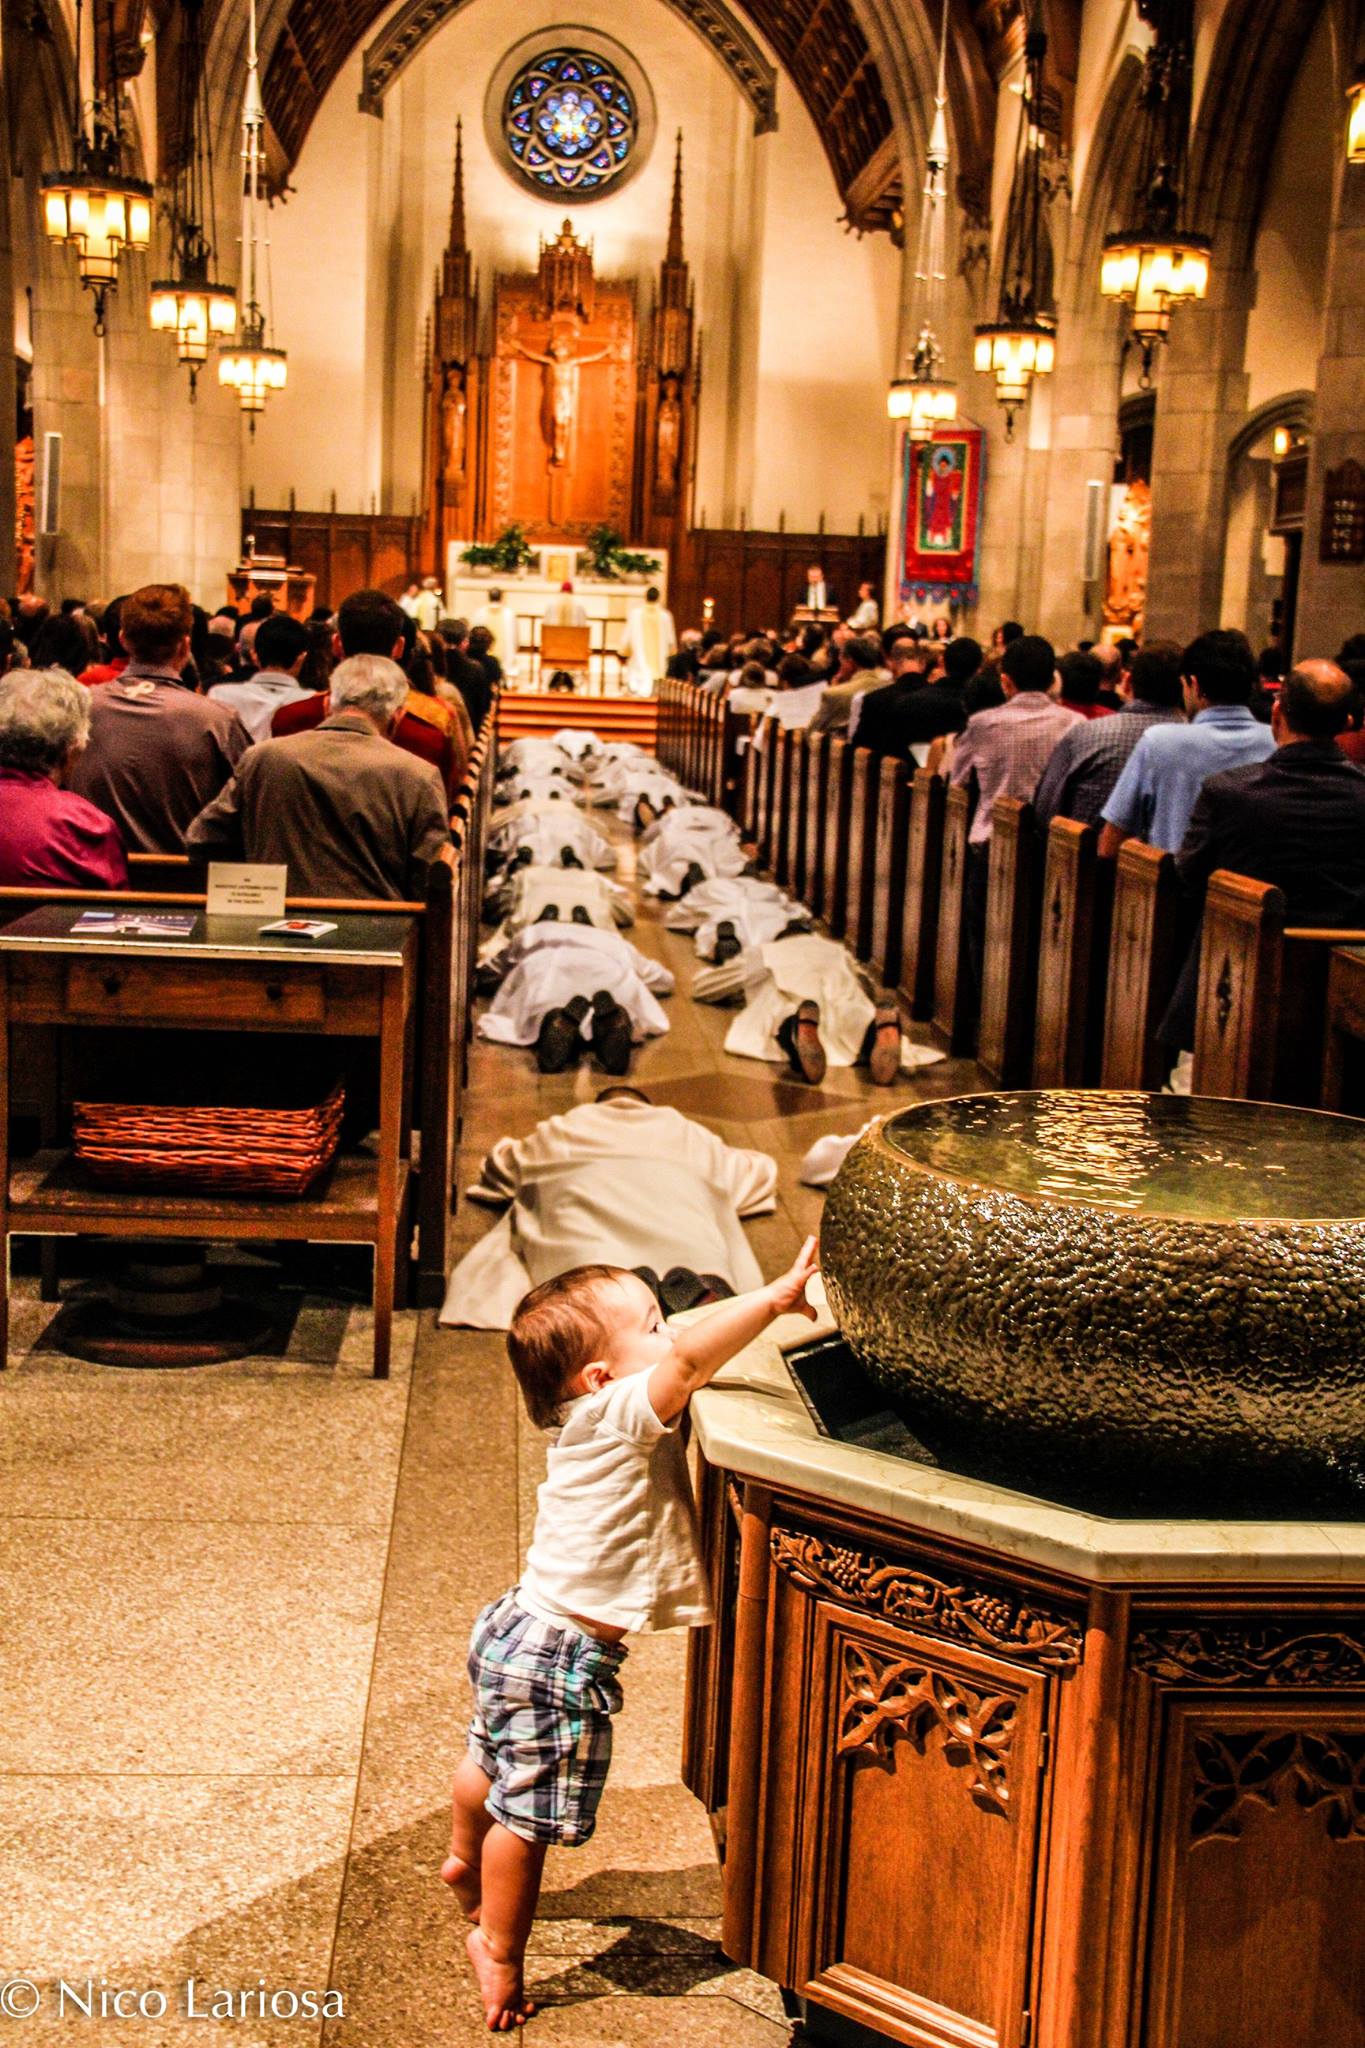 prostration-and-baptismal-font-nico-lariosa-with-permission